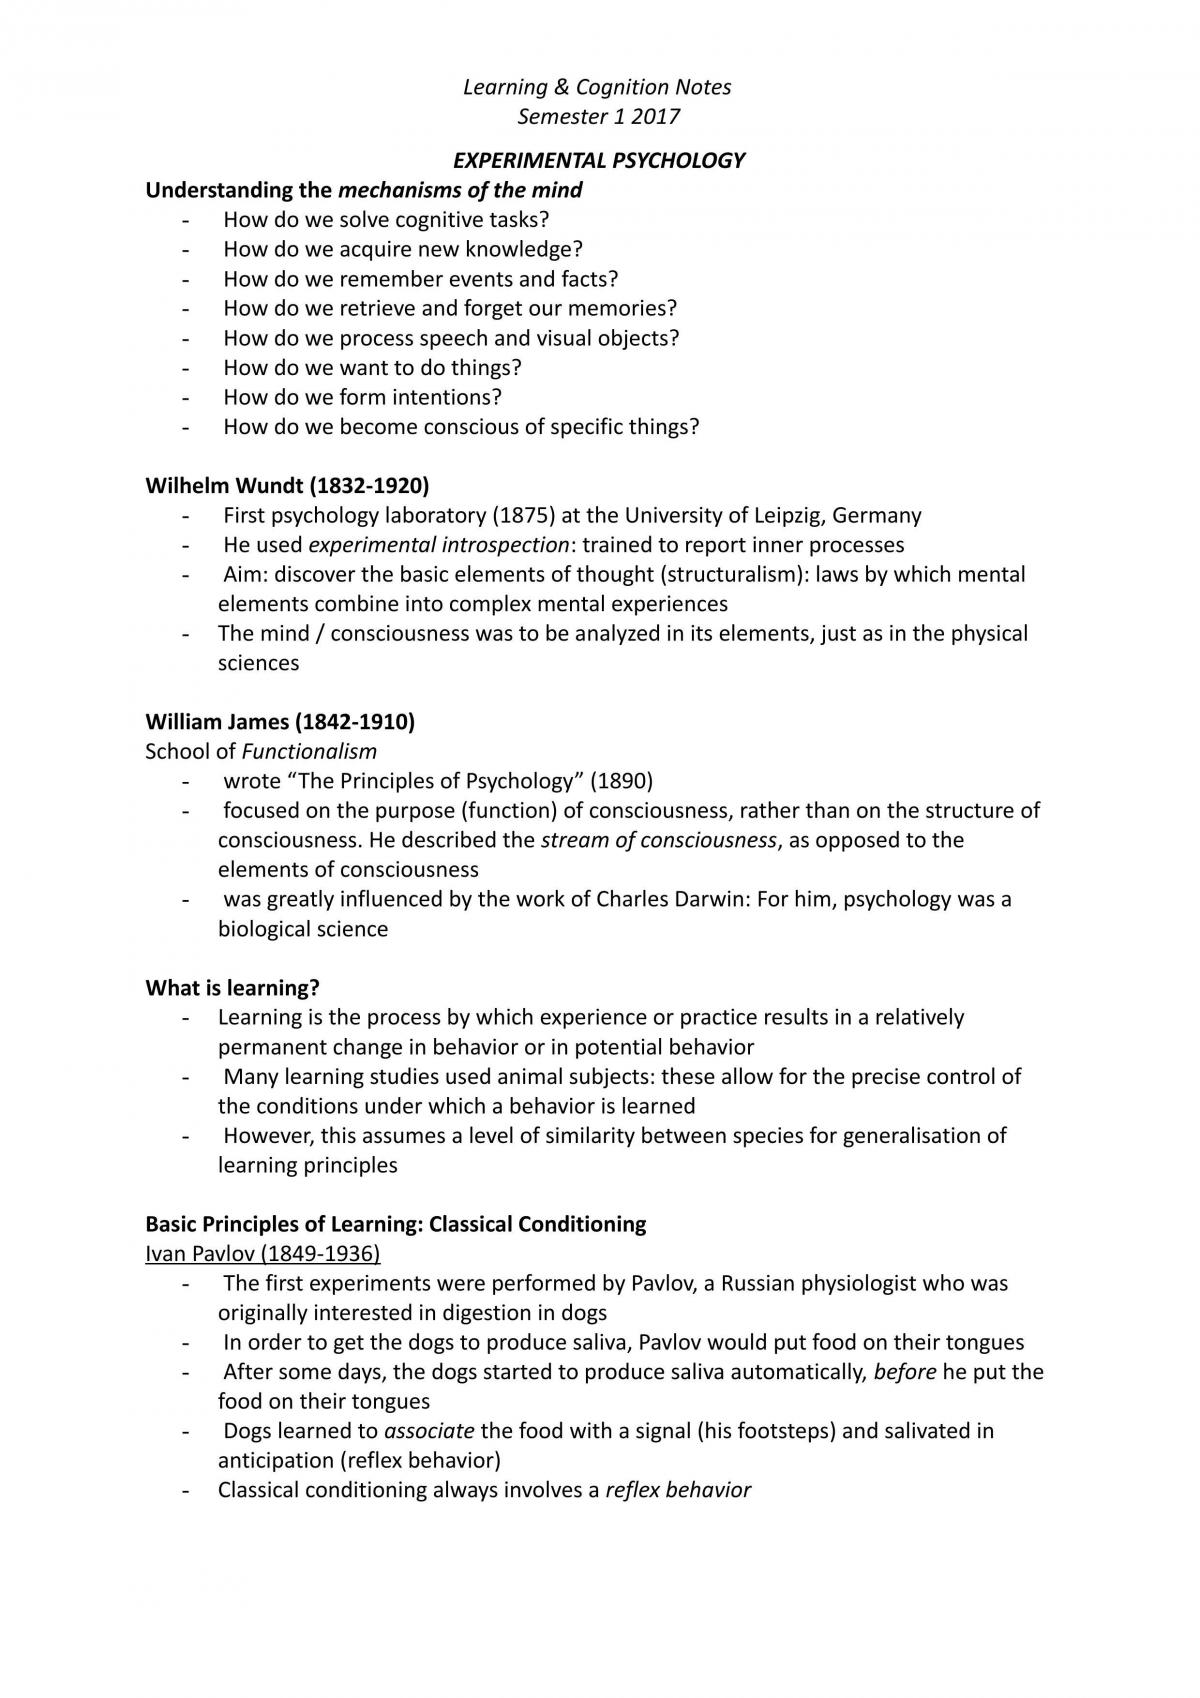 Learning and Cognition, Semester 1 Notes - Page 1